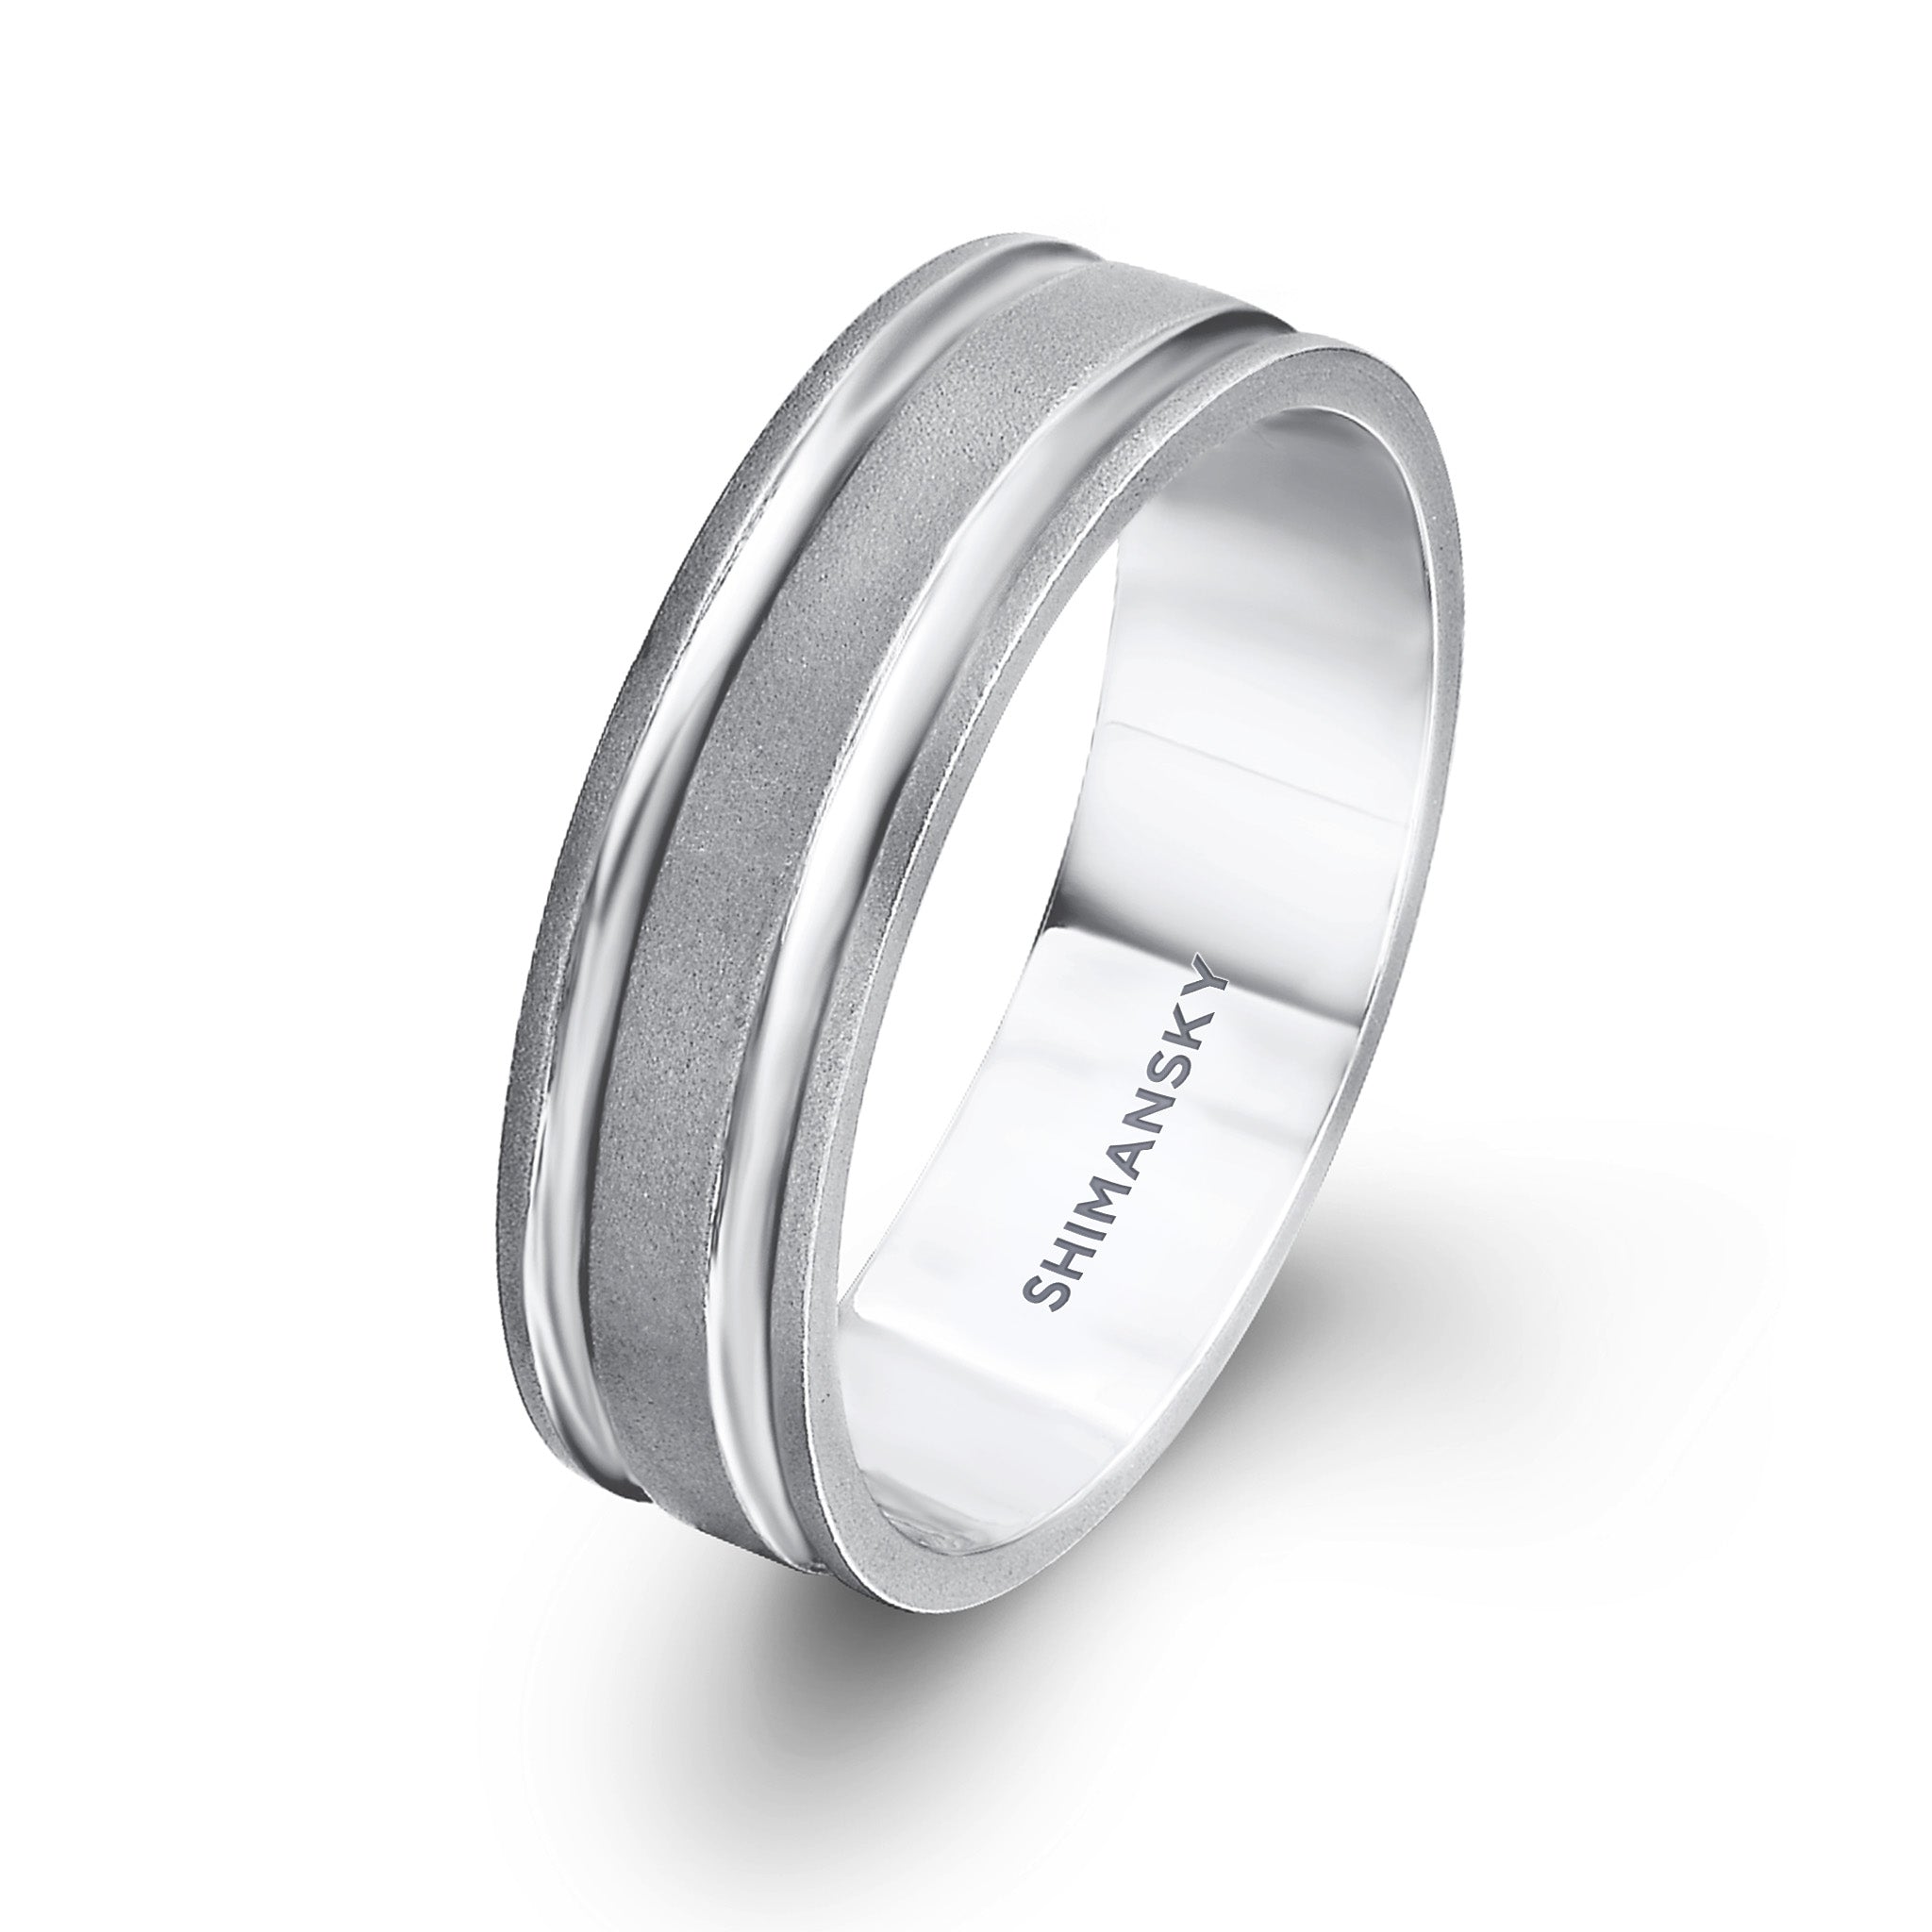 Shimansky - Max-line Flat Wedding Band in Brushed Palladium with two Shiny Grooves